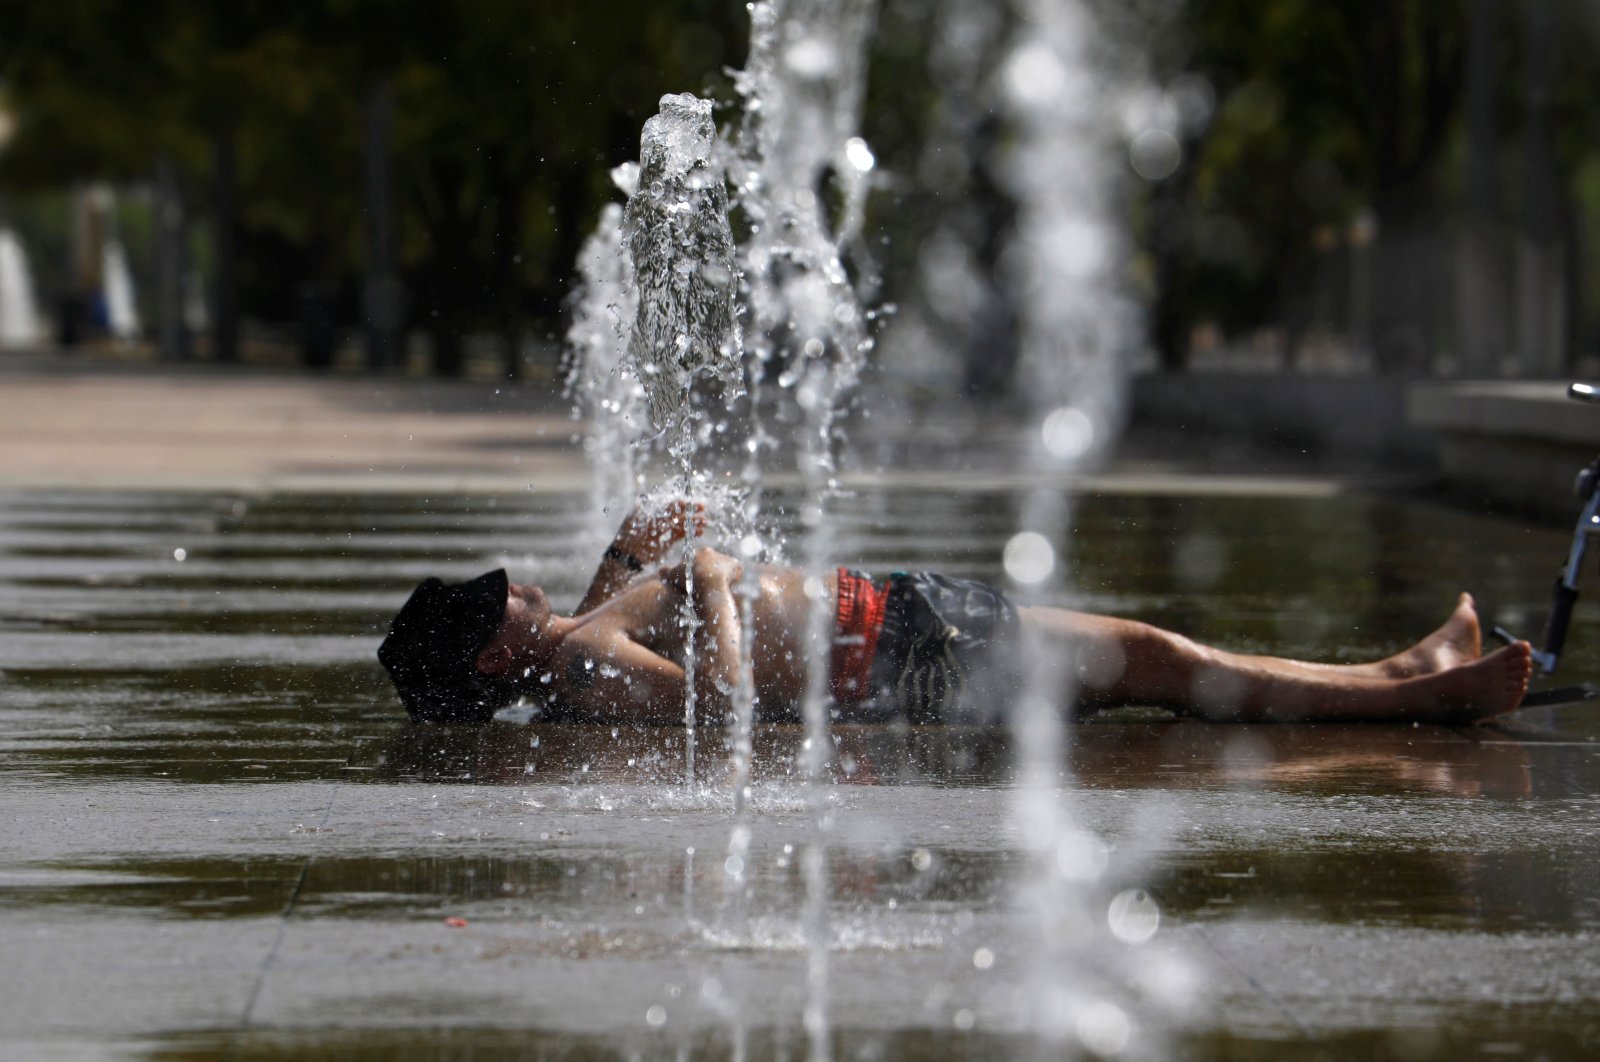 People refresh themselves during the heat wave, with temperatures reaching up to 44 to 46 degrees Celsius in some parts of the country, in Cordoba, Andalusia, Spain, Aug. 14, 2021. (EPA Photo)